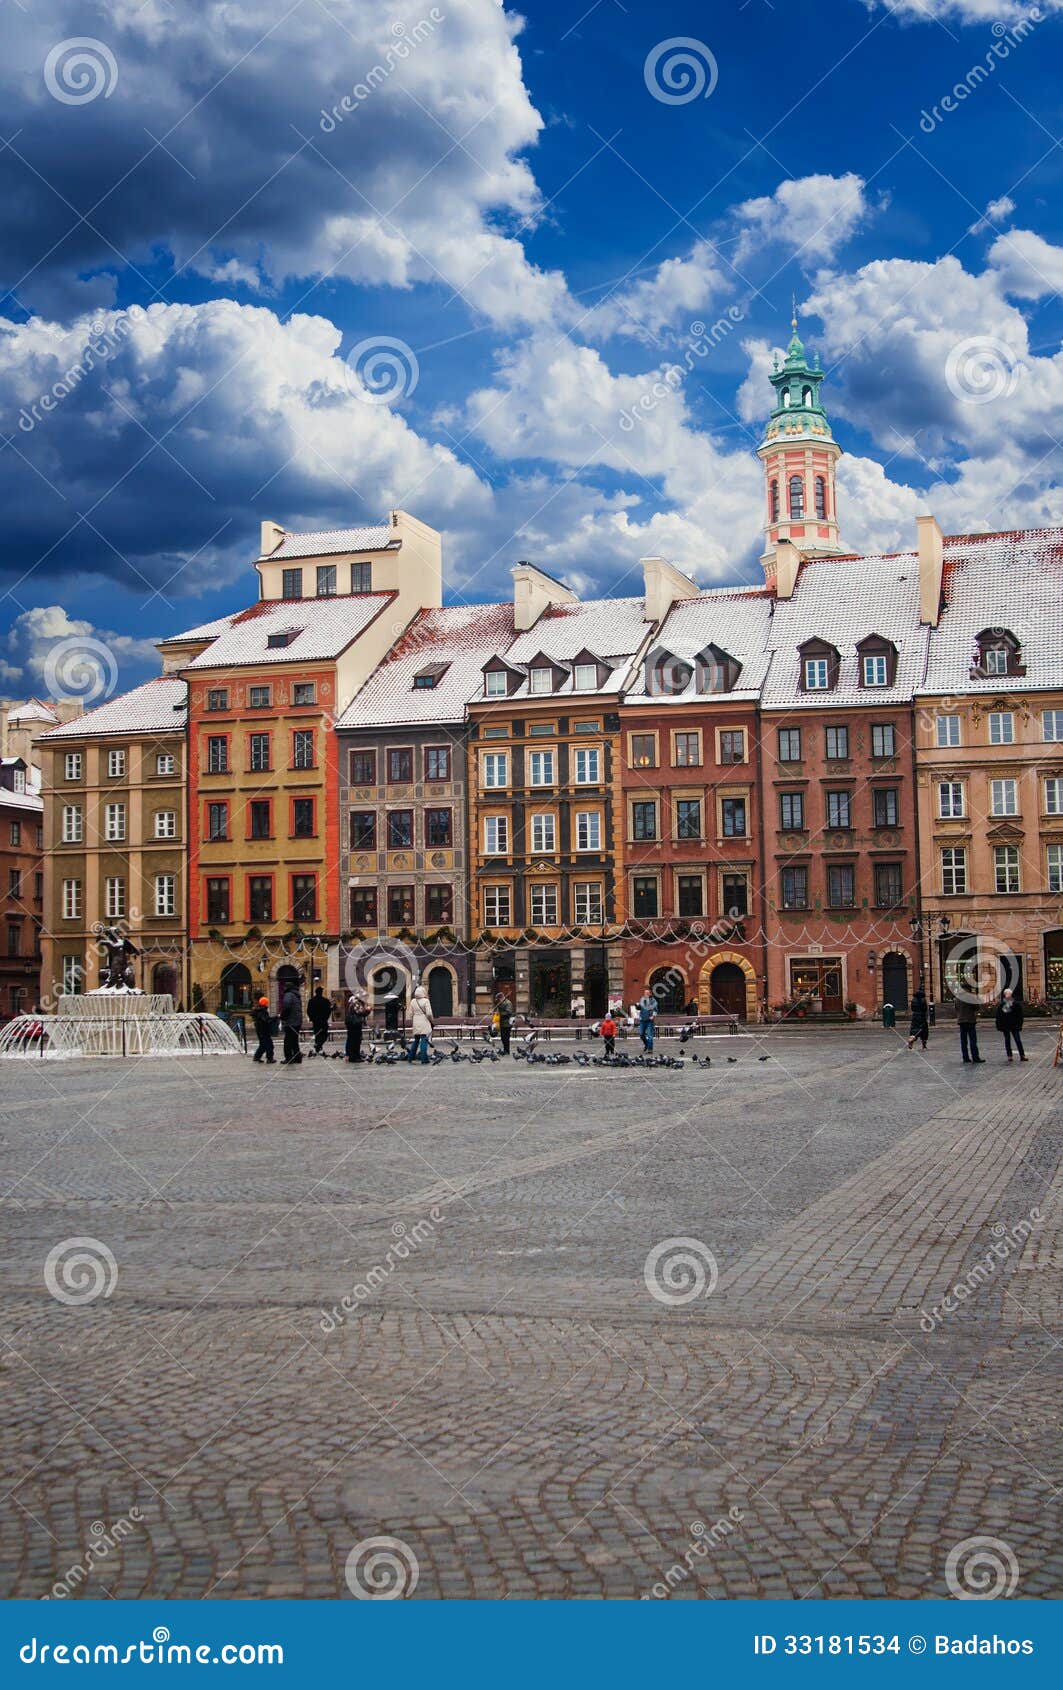 Old Town in Warsaw. Poland.